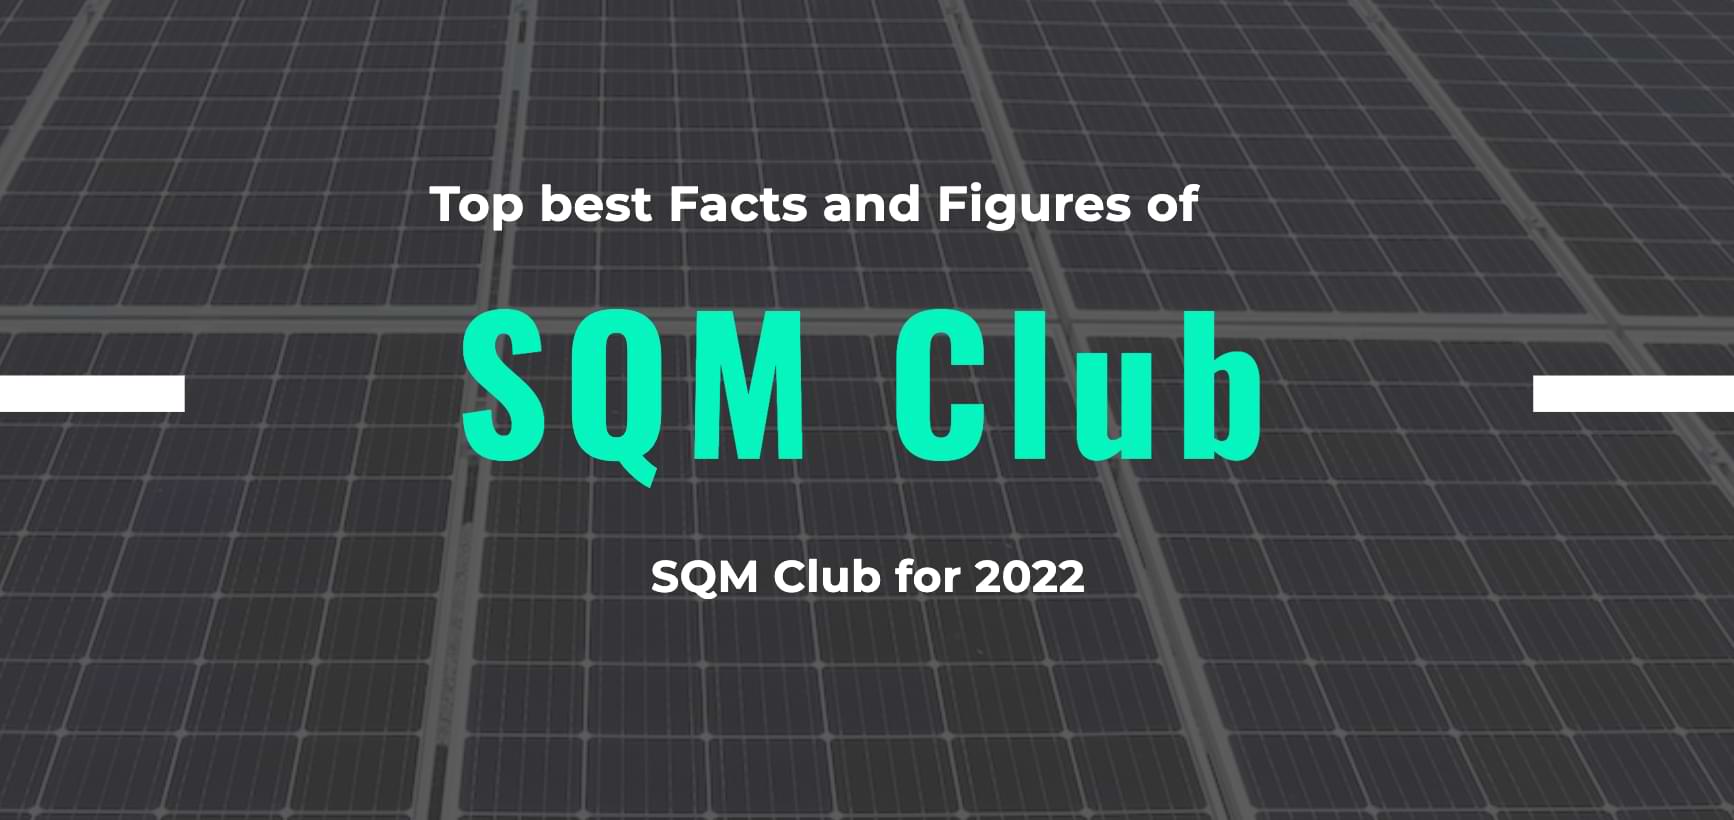 Top best Facts and Figures of SQM Club for 2022